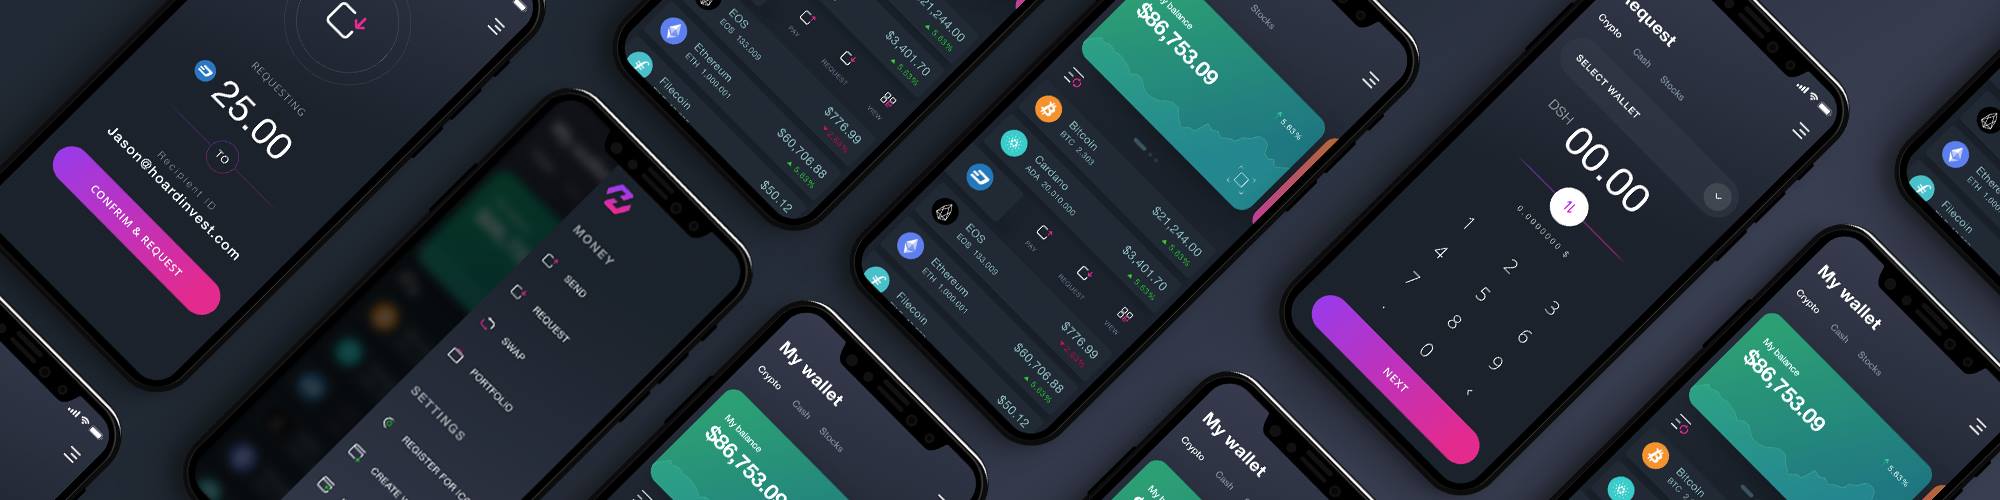 Hoard: Next-Generation and Open-Sourced Crypto-Banking for All